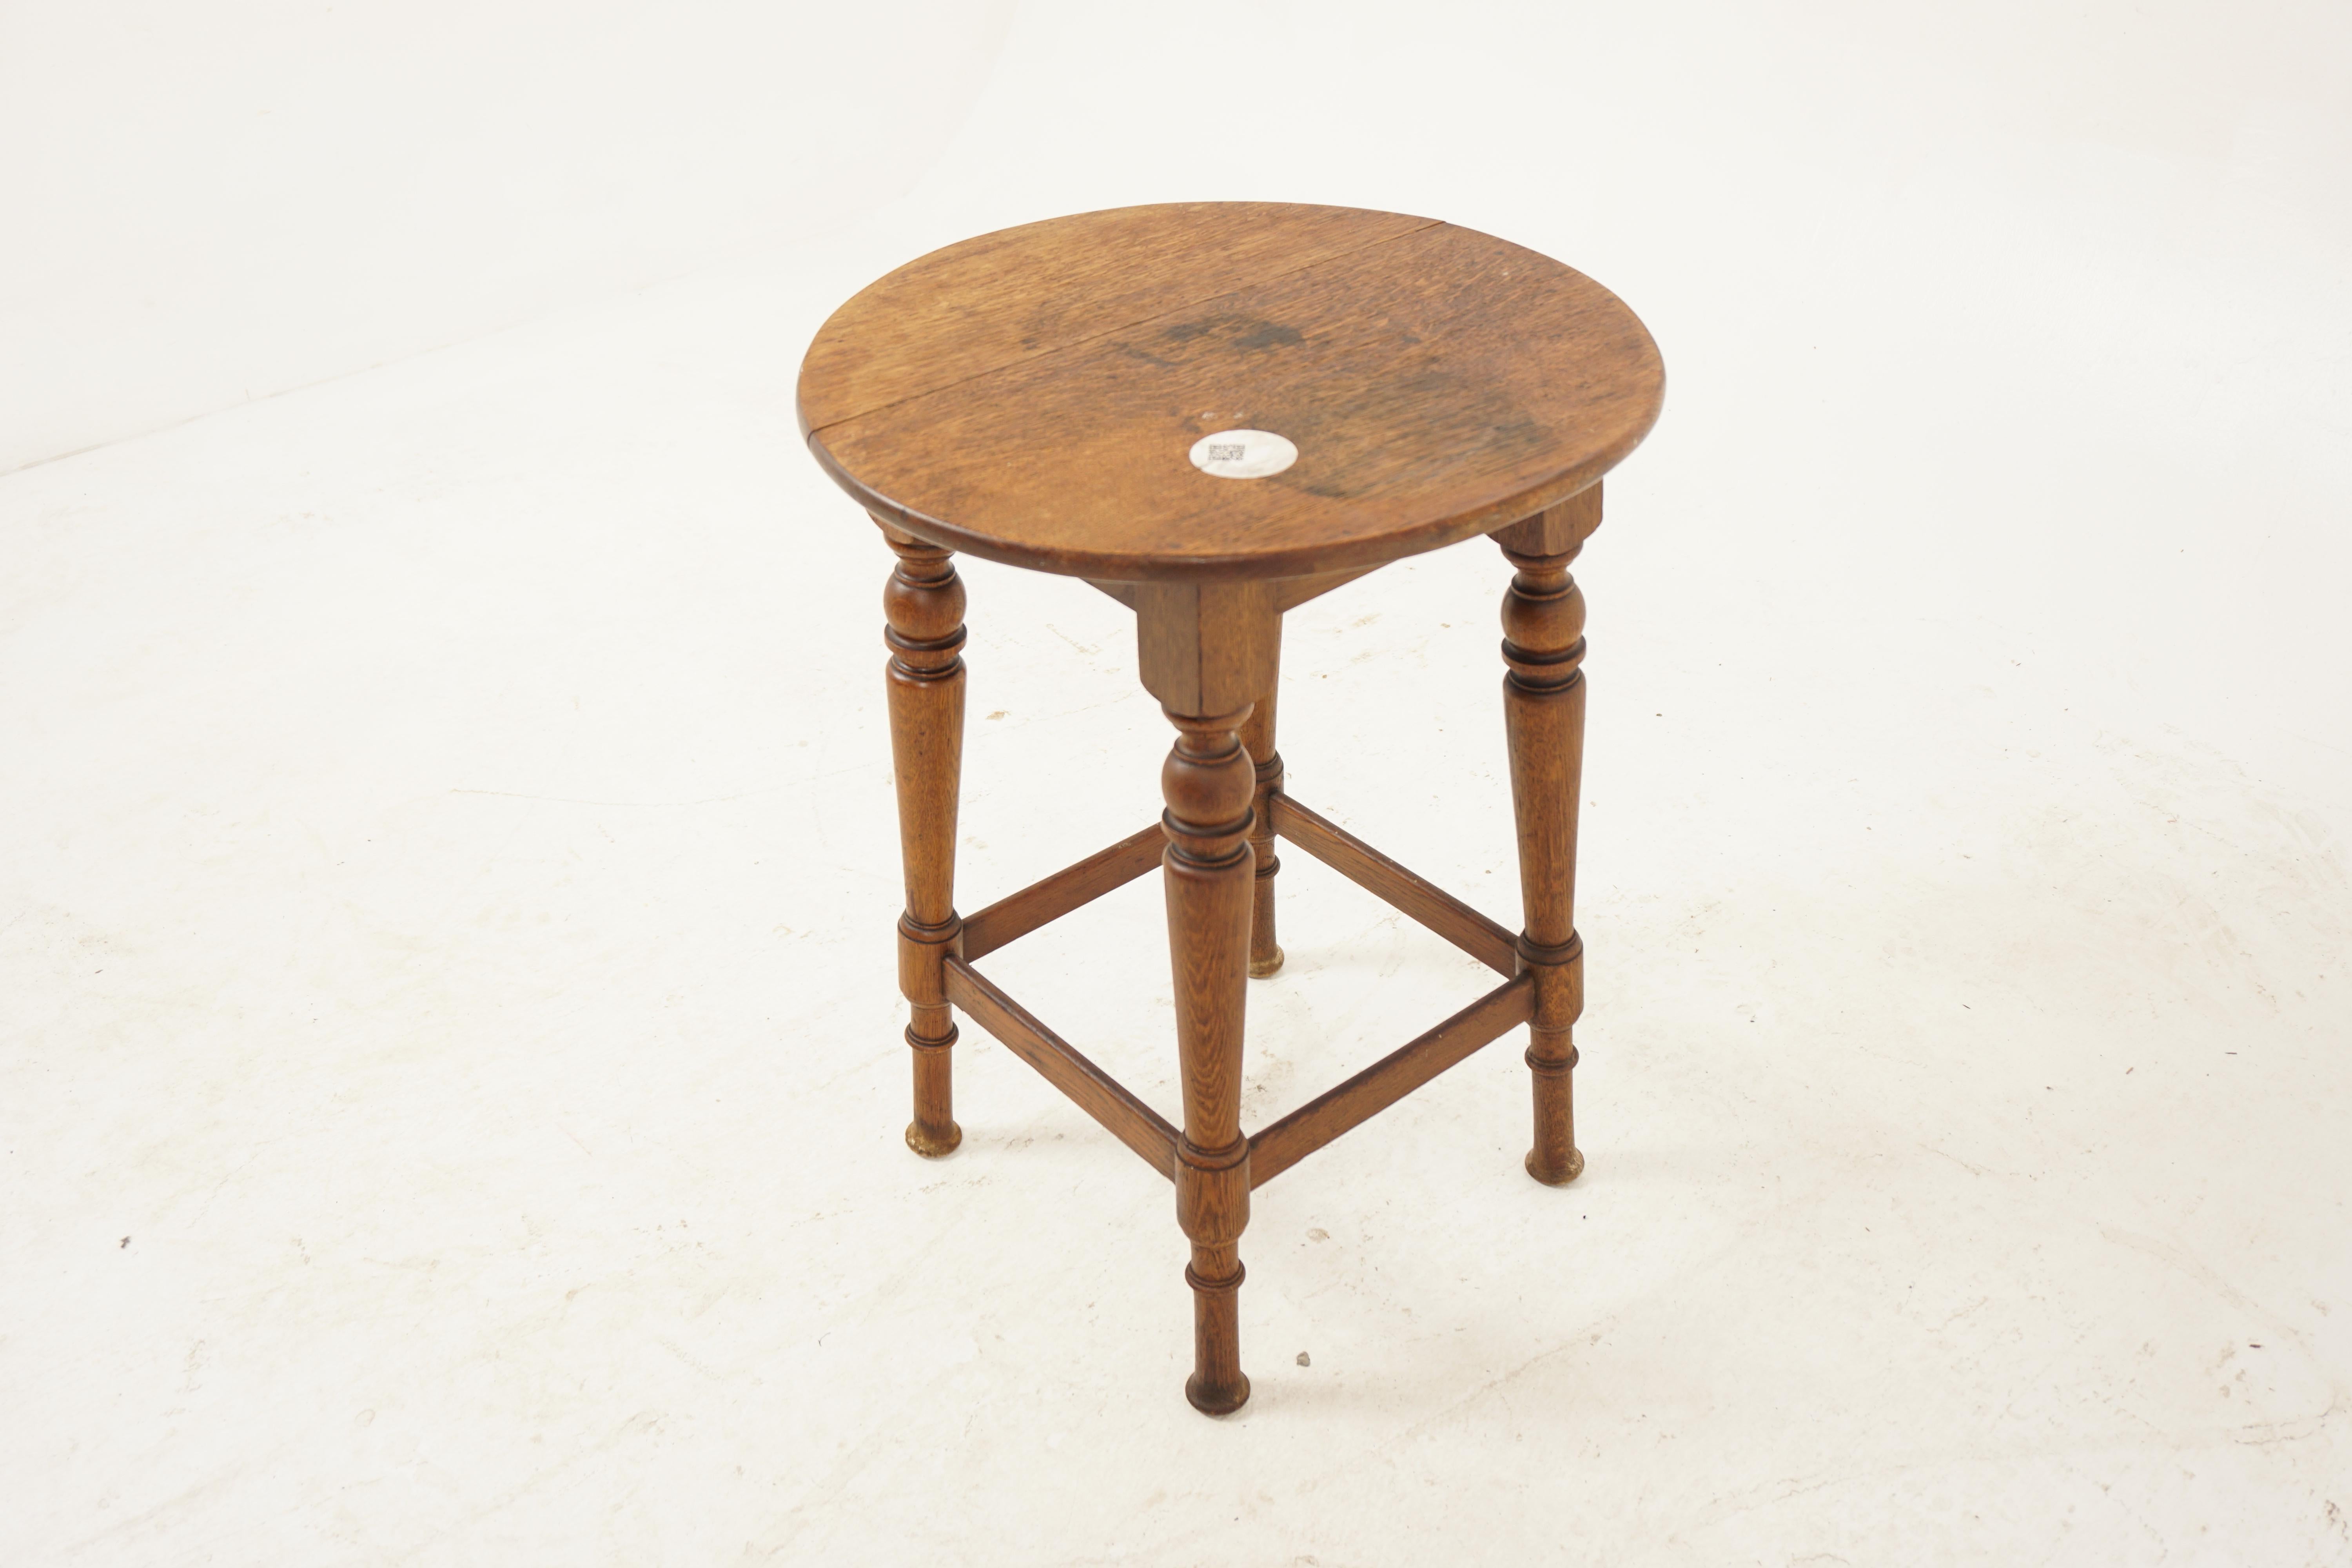 Antique Oak Table, Small Circular Plant Stand, Antique Furniture, Scotland 1920, H1100

+ Scotland 1920
+ Solid Oak
+ Original Finish
+ Circular solid oak top
+ All standing on four turned tapering legs
+ Connected by stretcher
+ Please note